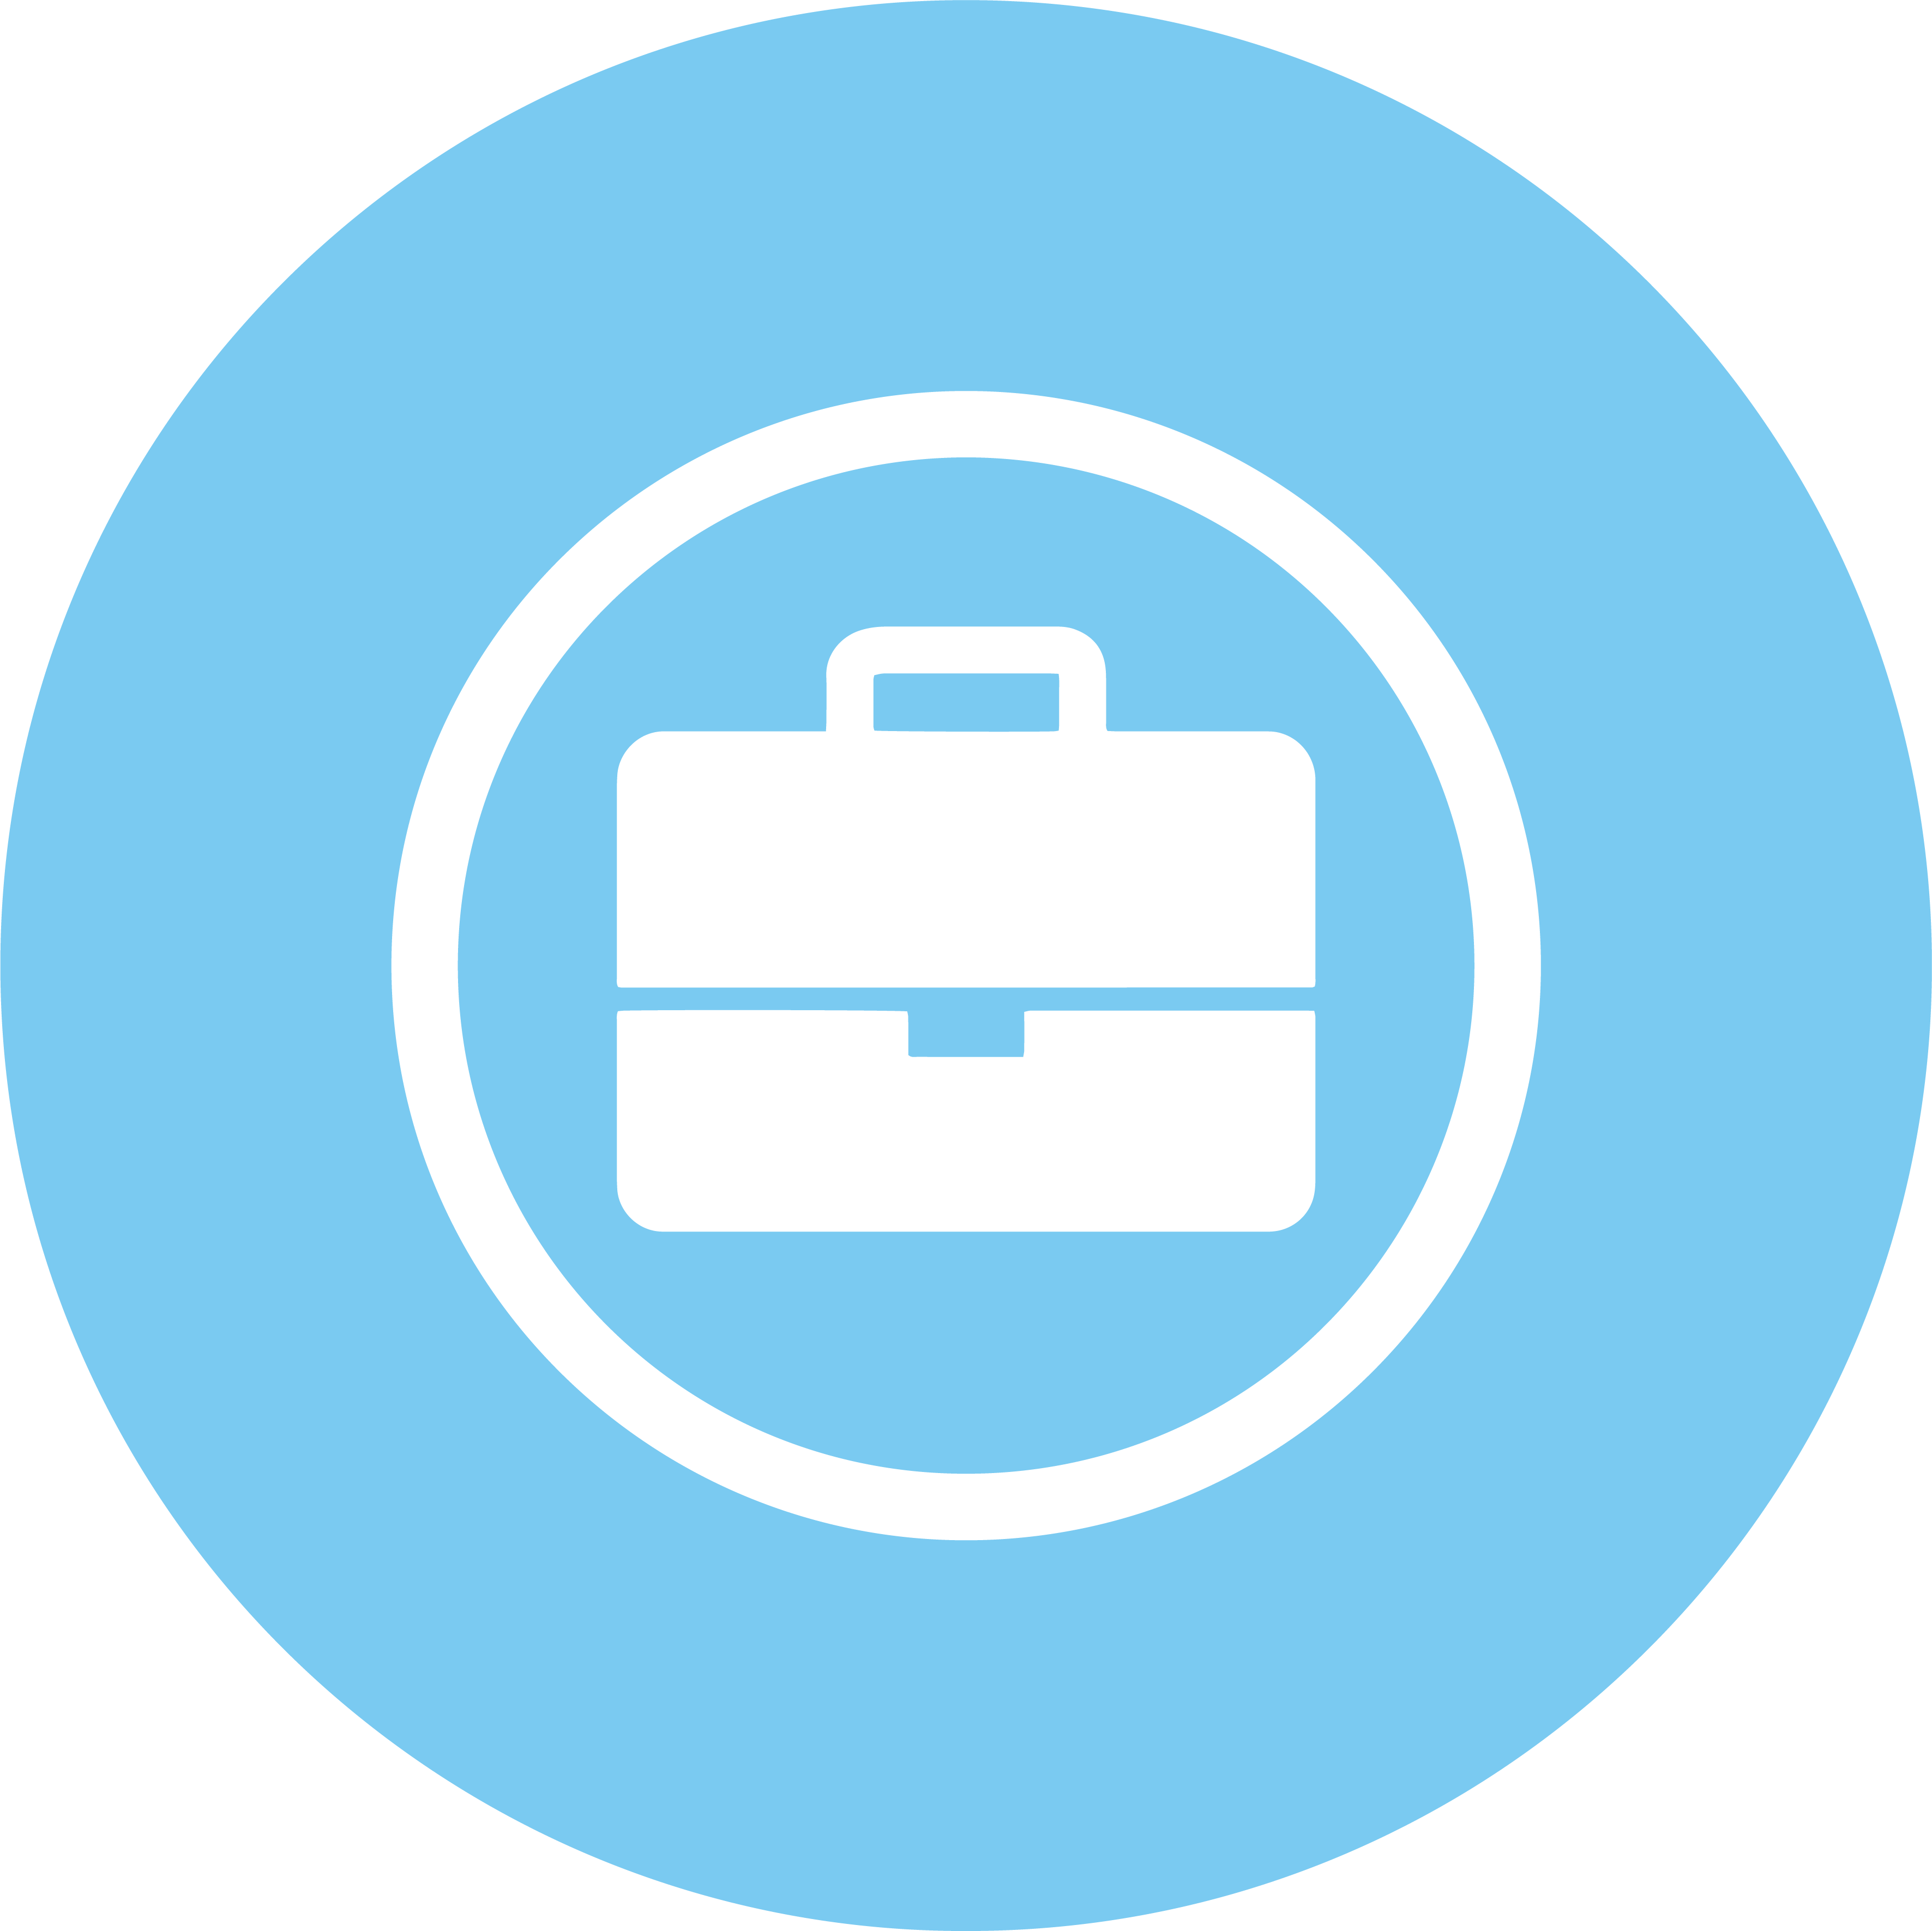 Briefcase icon on blue background